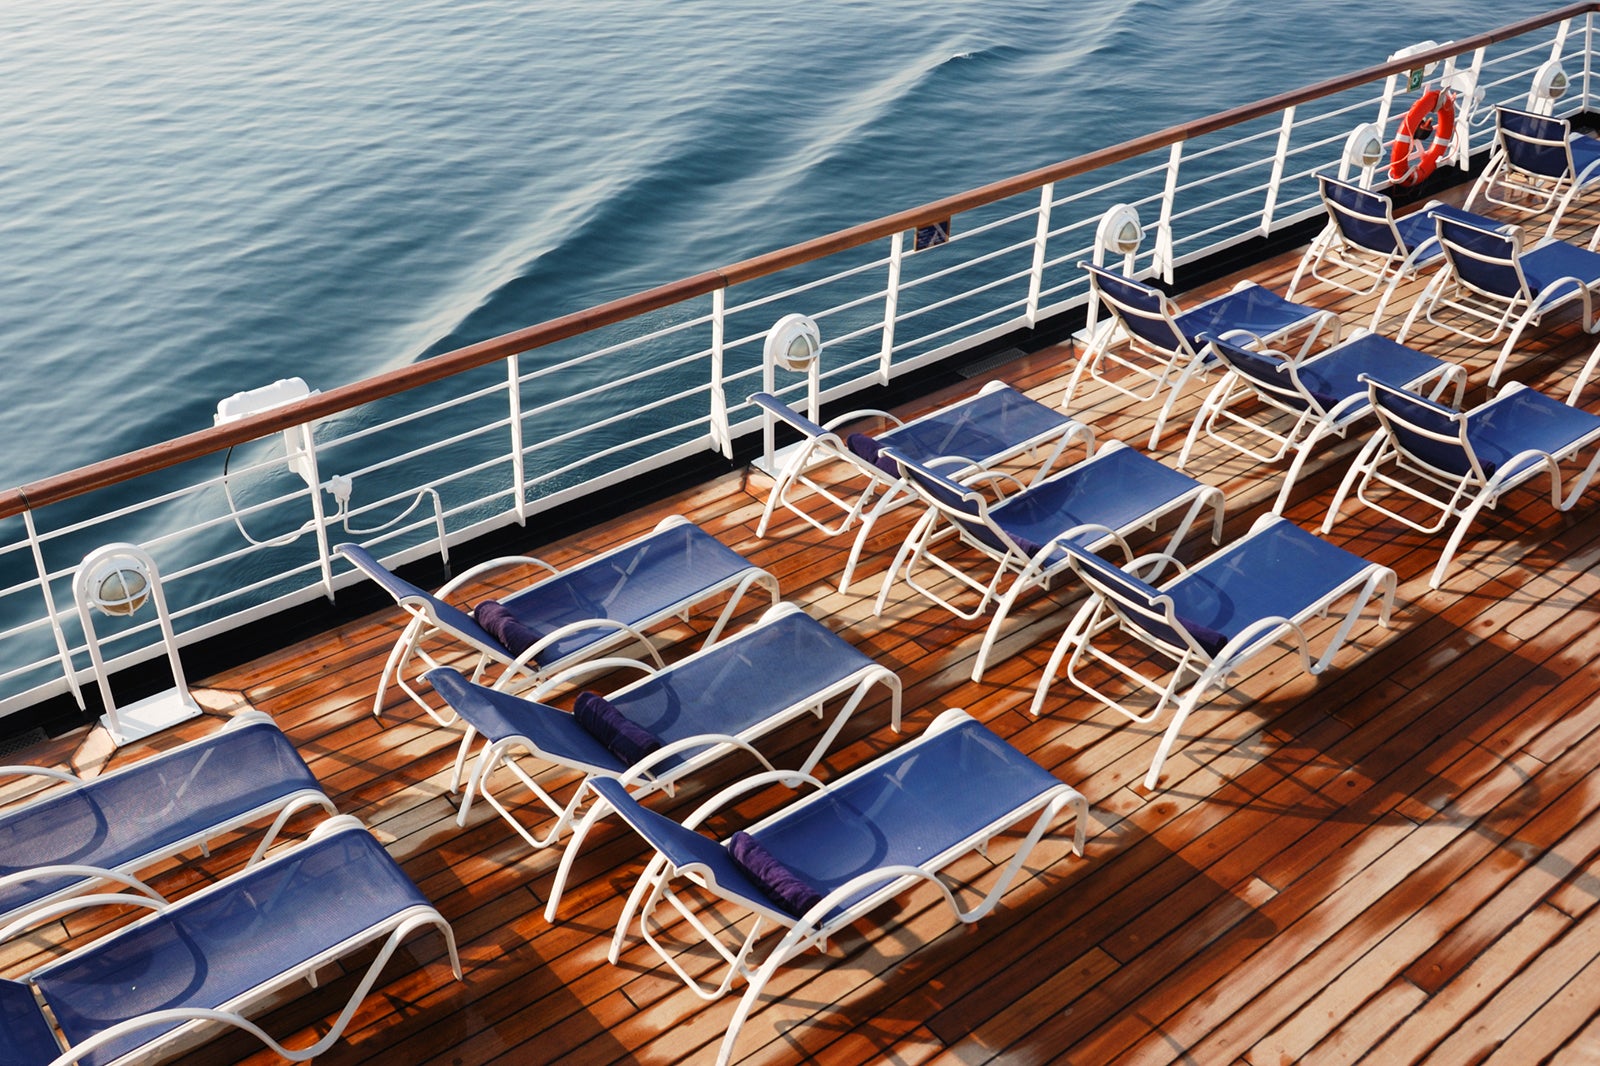 Cruise deals galore: Why this could be the year to spend the winter holidays on a ship